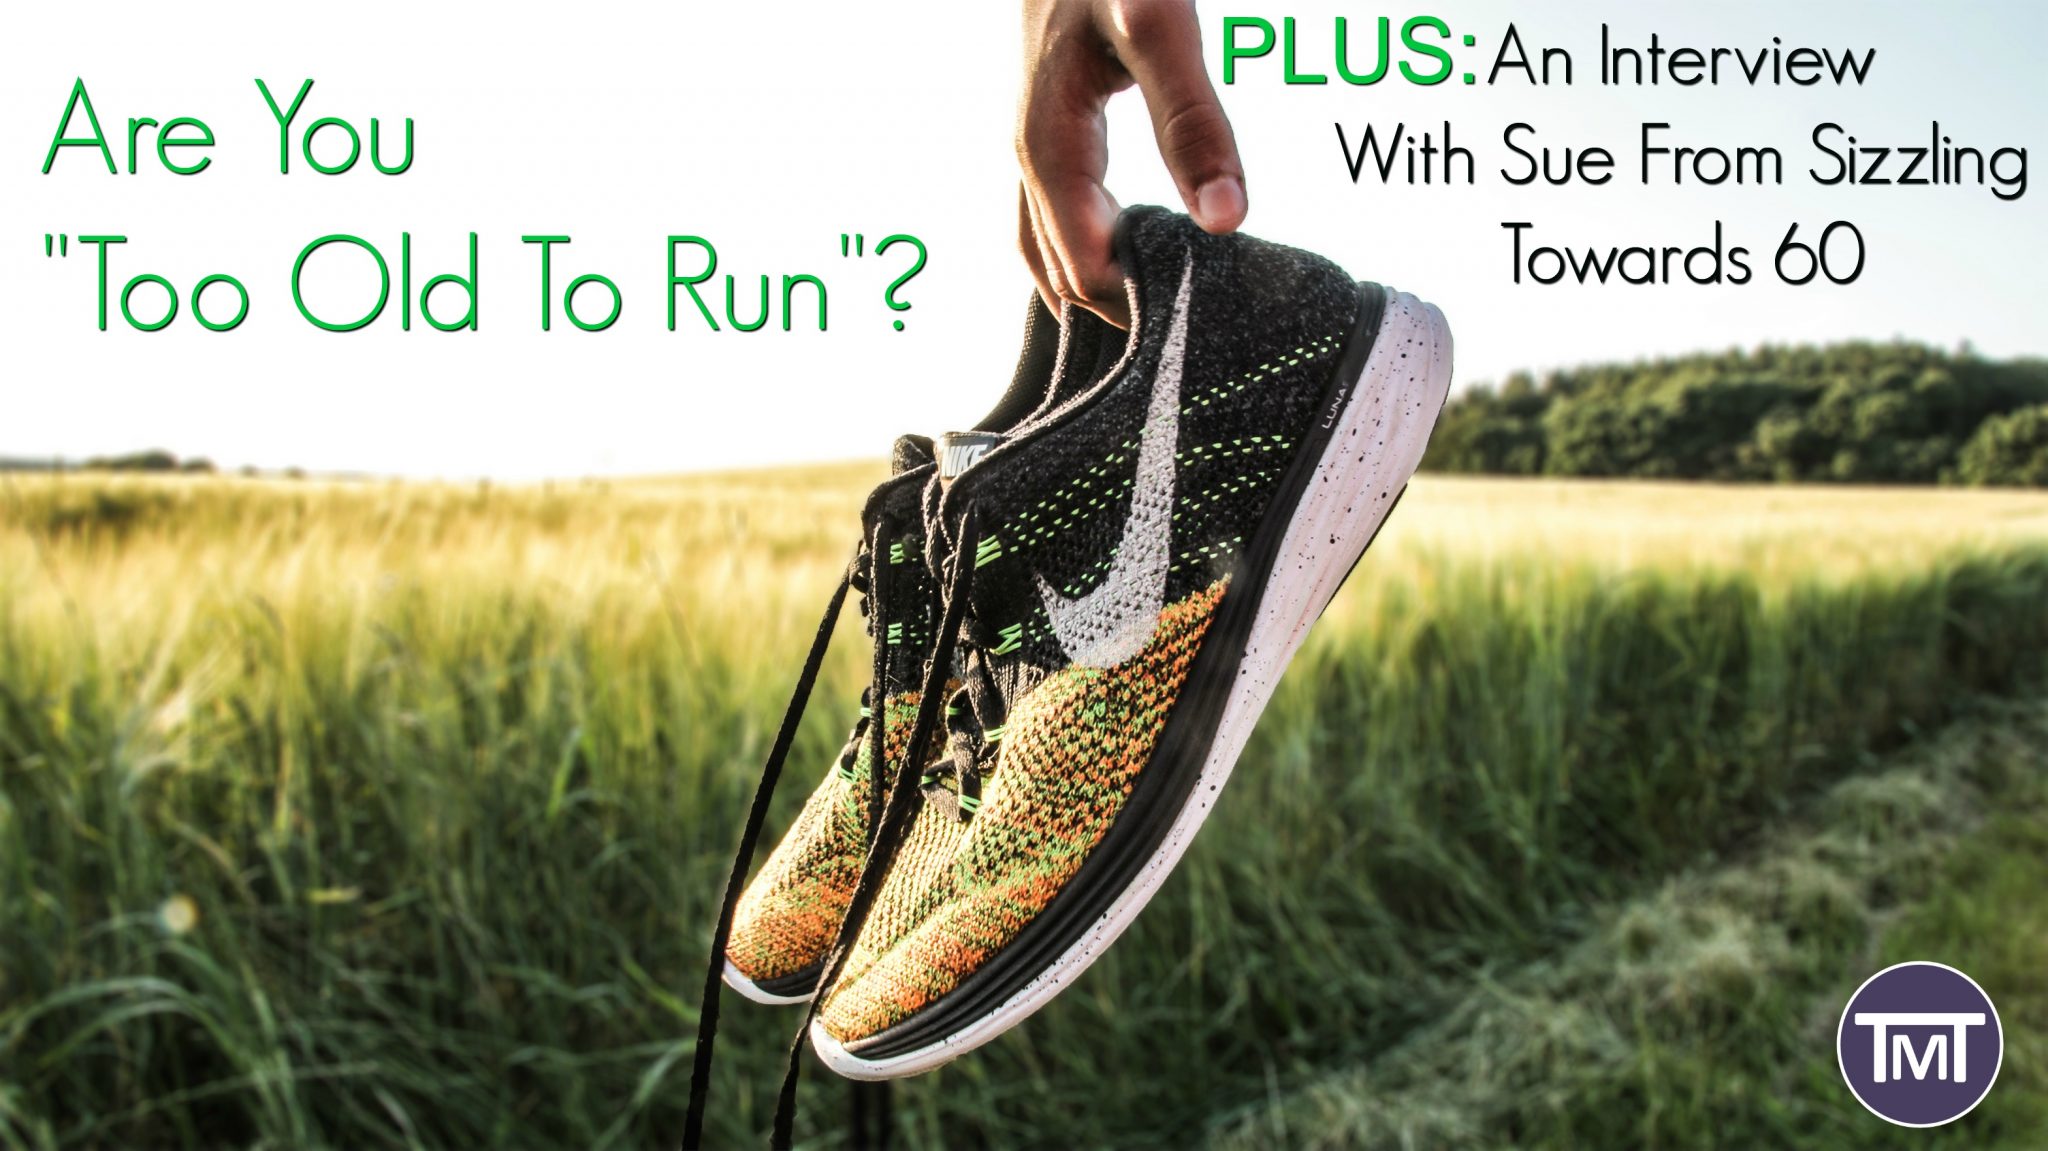 feature image, pair of trainers being held against a field backdrop with writing on saying "are you too old to run? Plus an interview with Sue at Sizzling Towards 60"